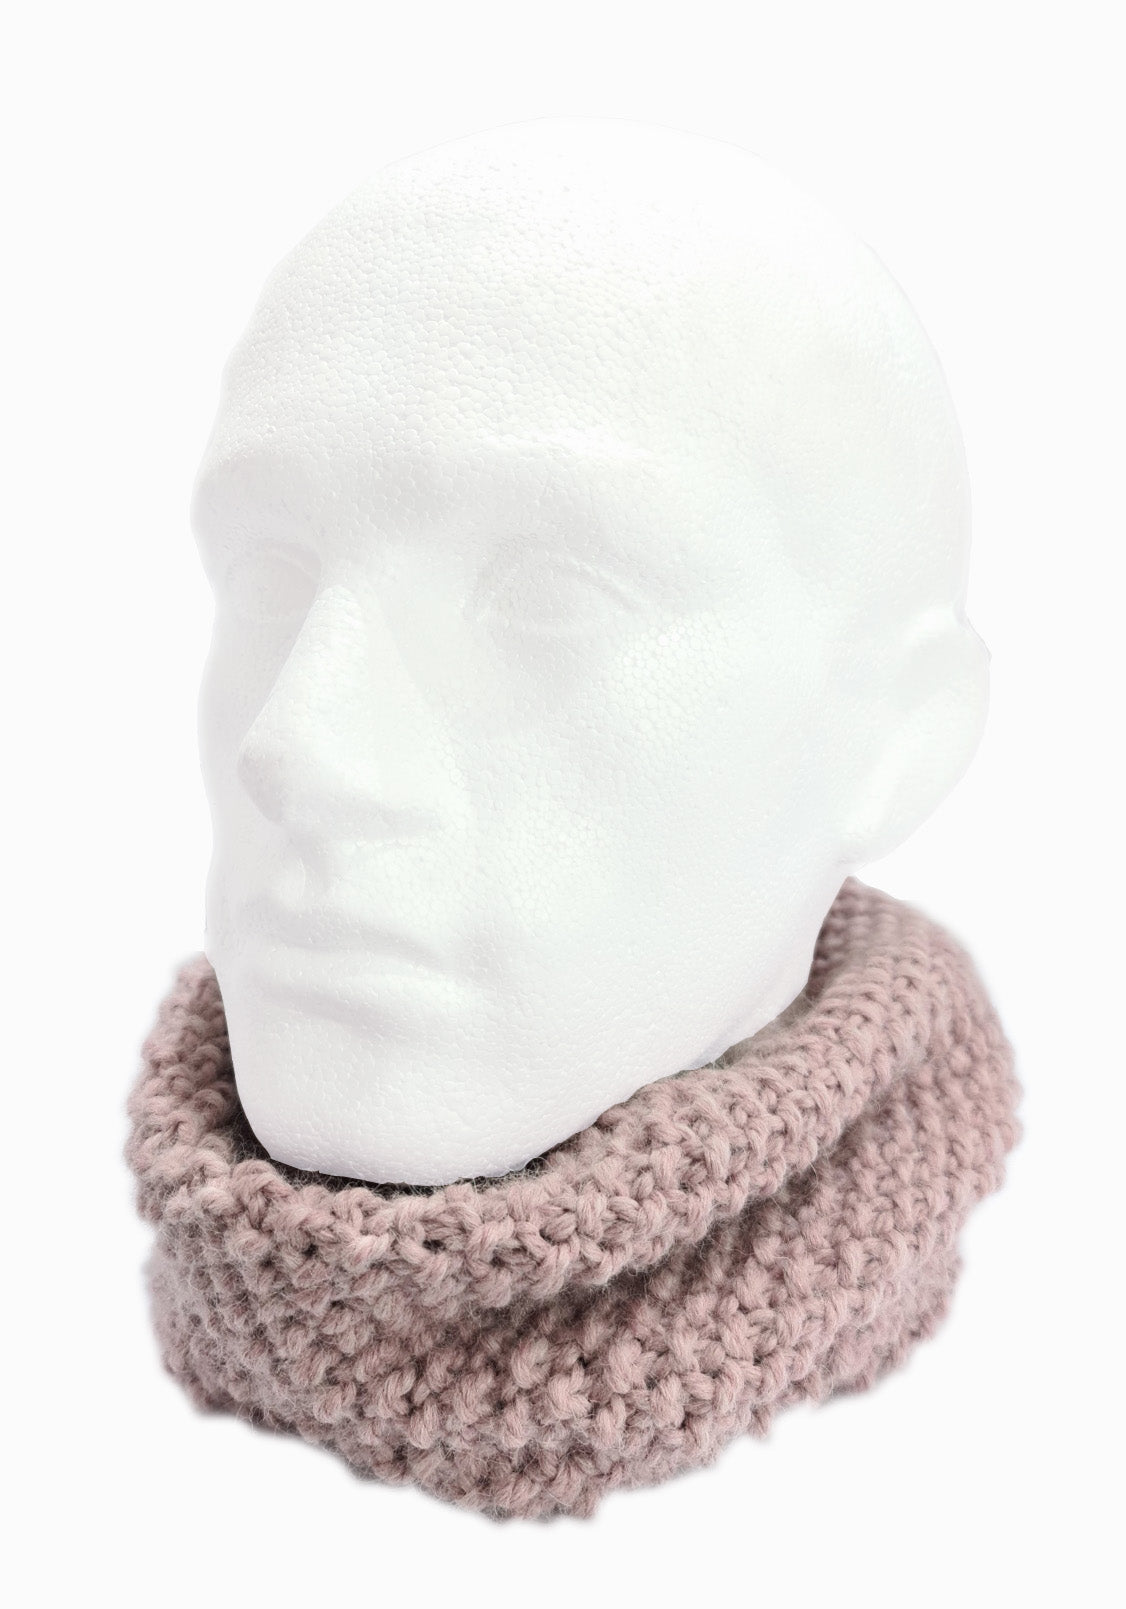 100% Alpaca Hand Knitted Infinity Scarf - Infinity Scarf Neck warmer RUFFNEK® Dusky Pink shown on a mannequin head